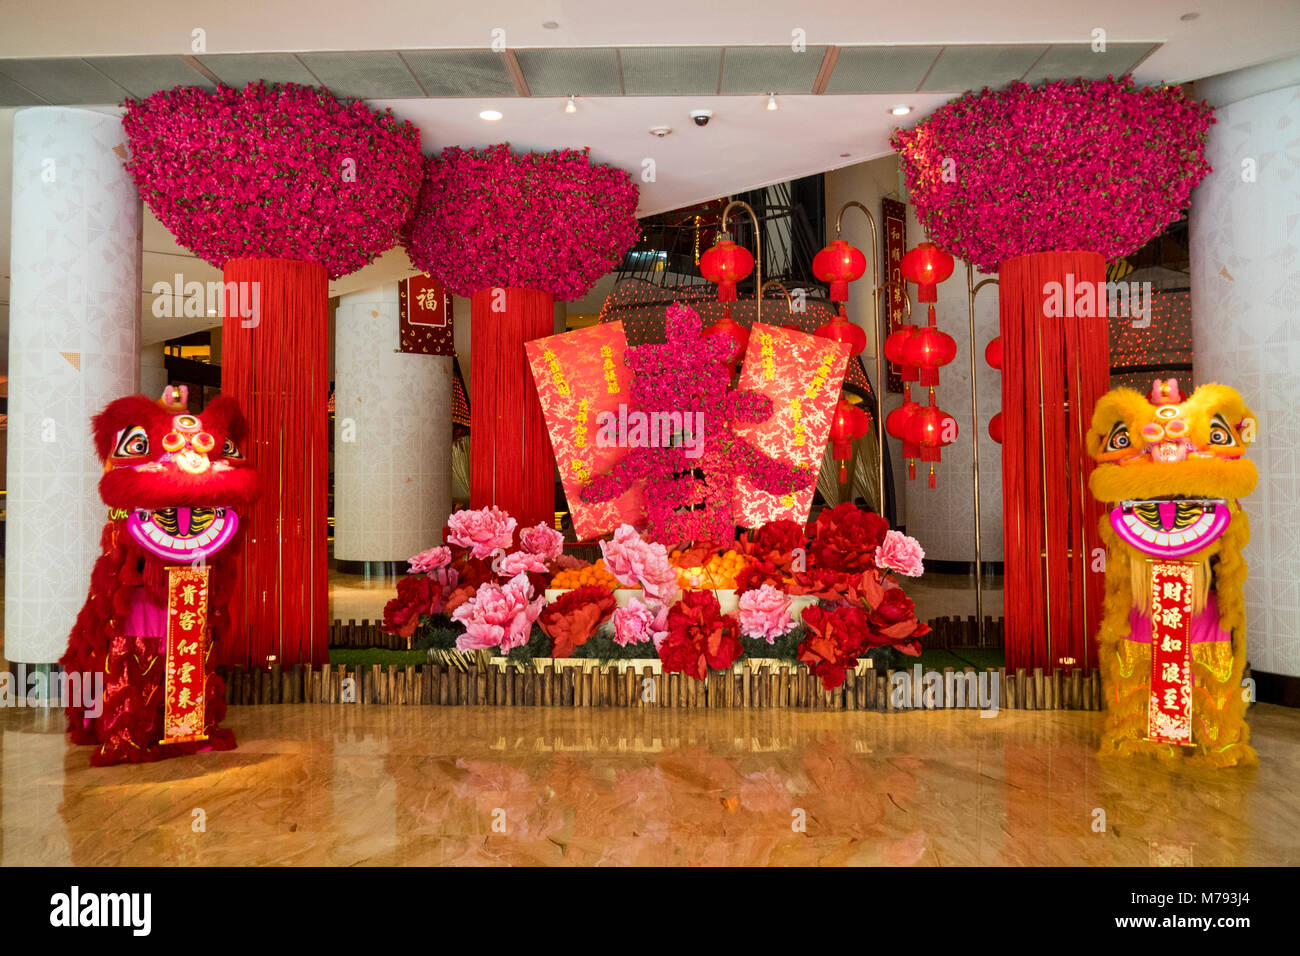 Decorations and Chinese dragons for celebrating Chinese New Year ...